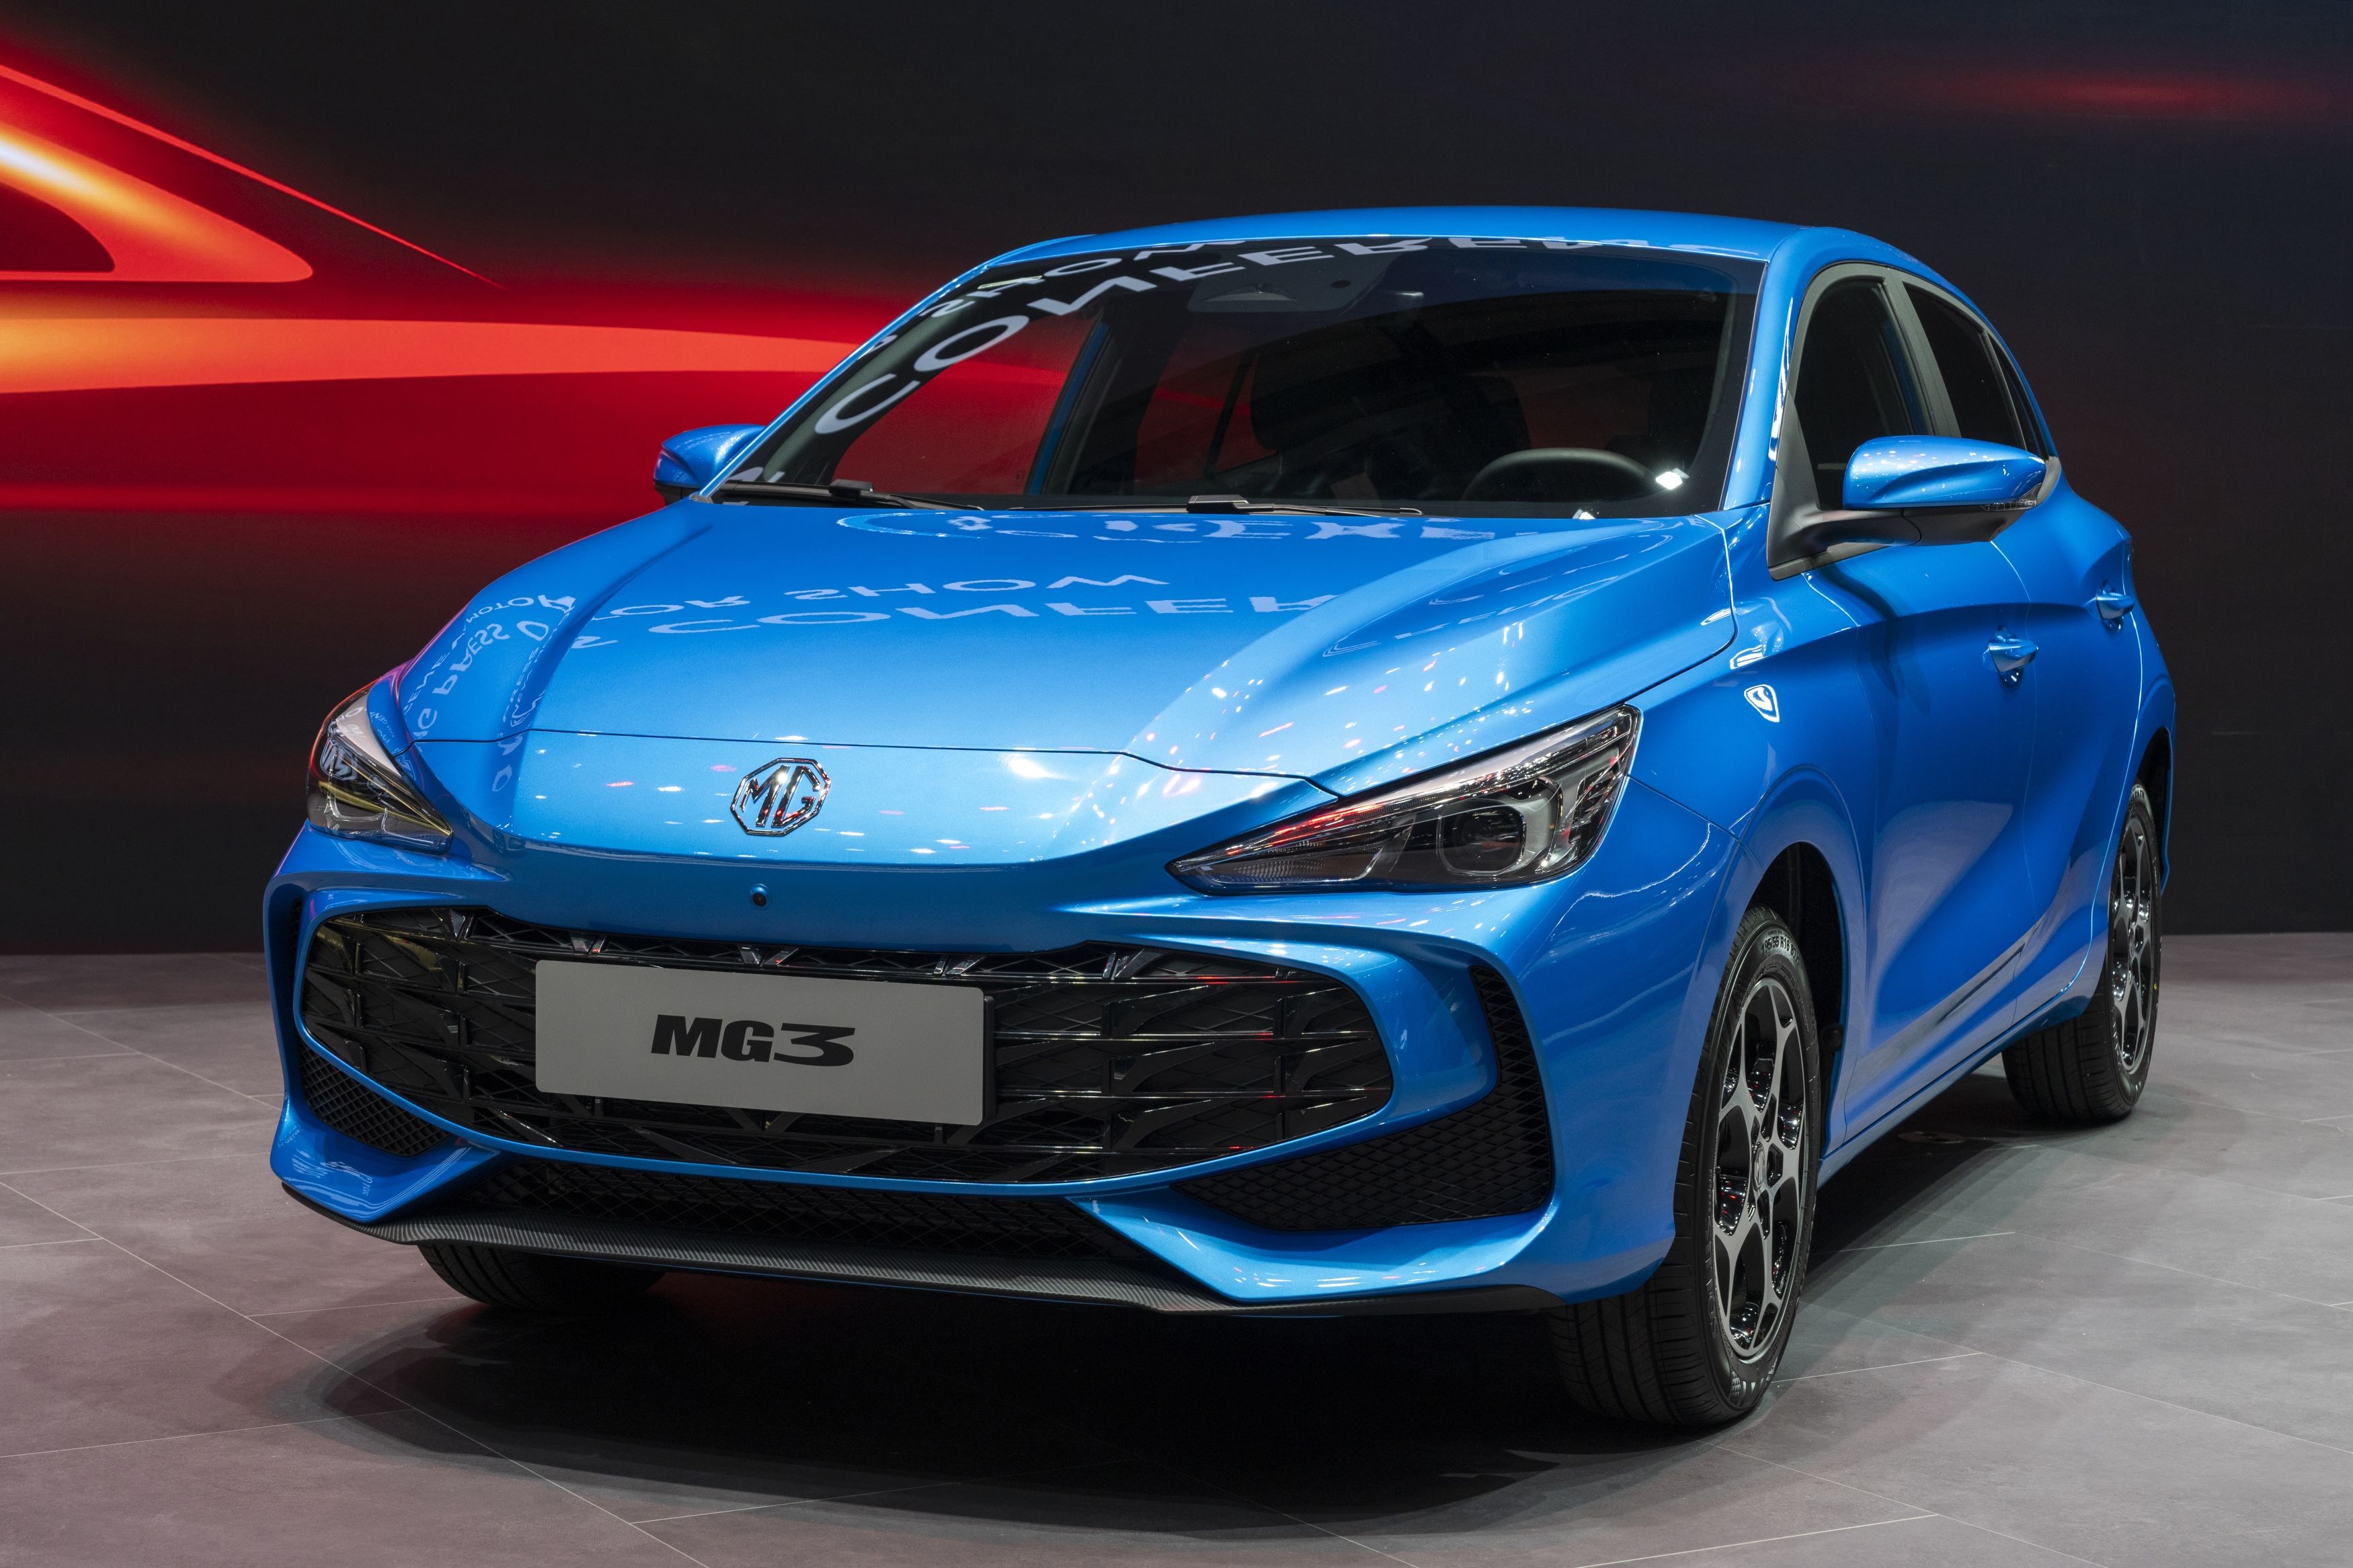 The New MG3 Hybrid+: Affordable Luxury and Hybrid Technology